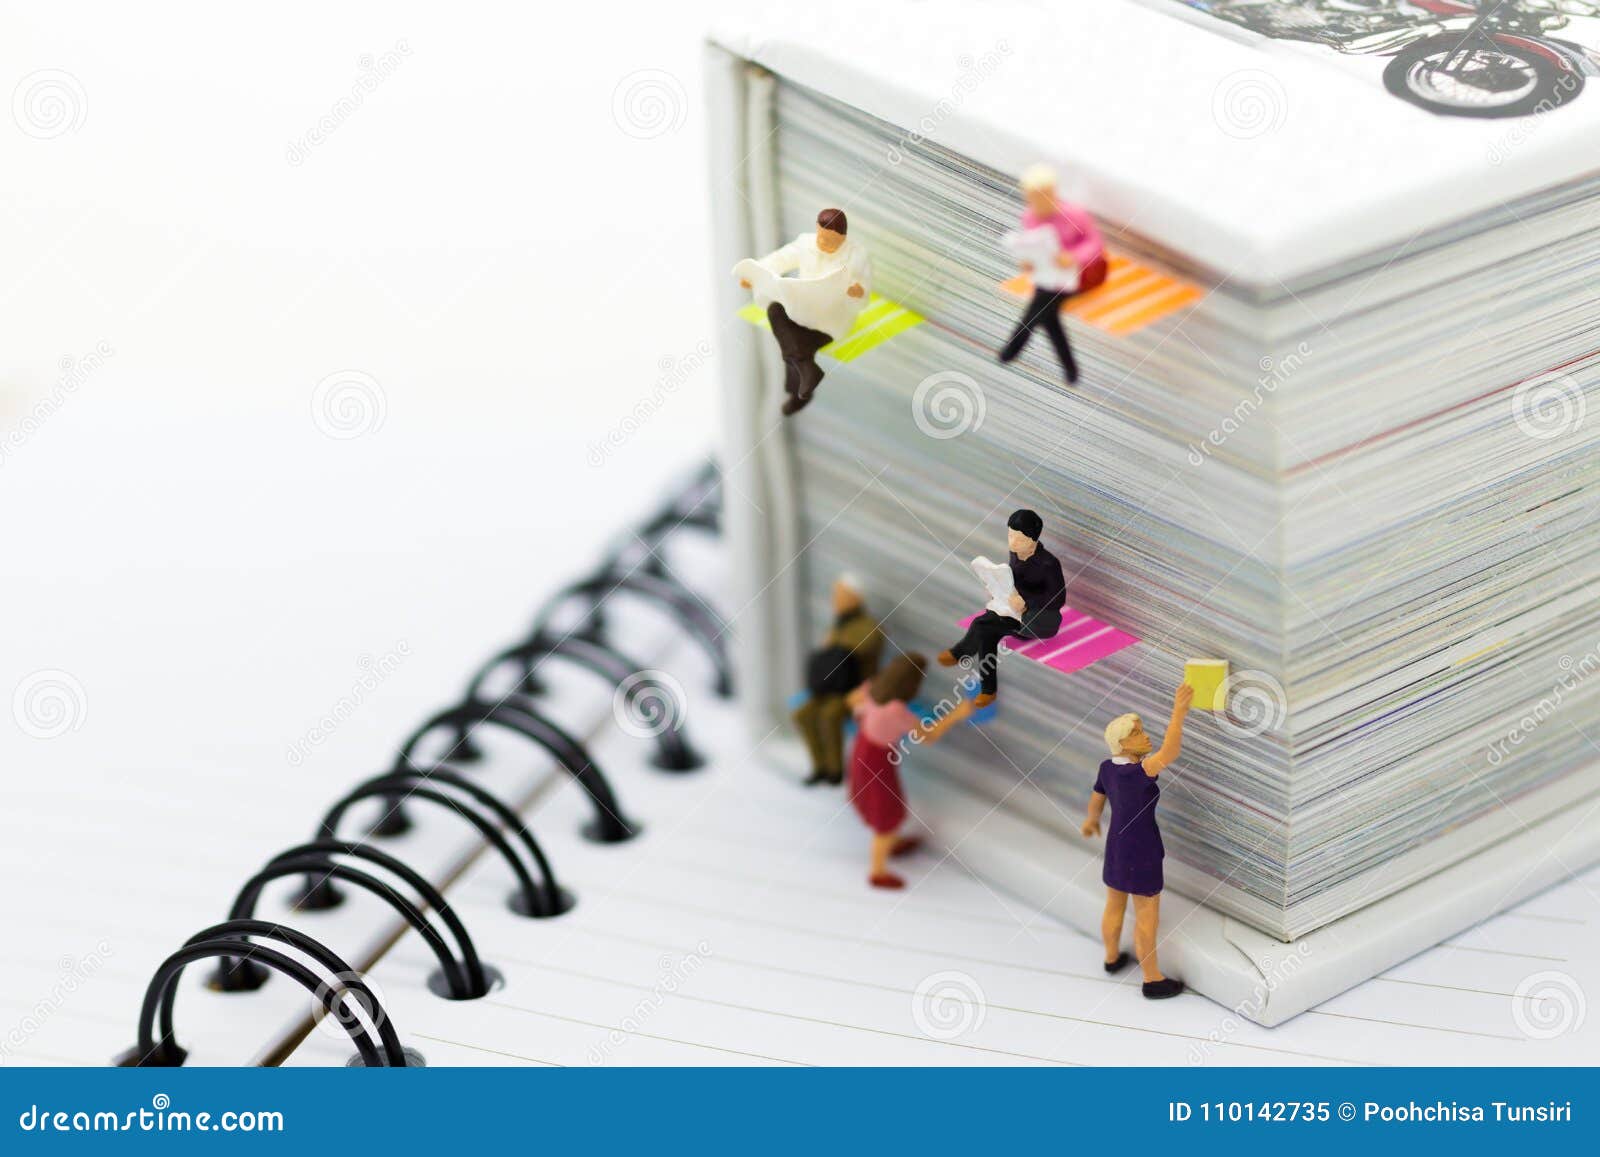 miniature people: businessman reading newspaper on a big book. image use for background education or business concept